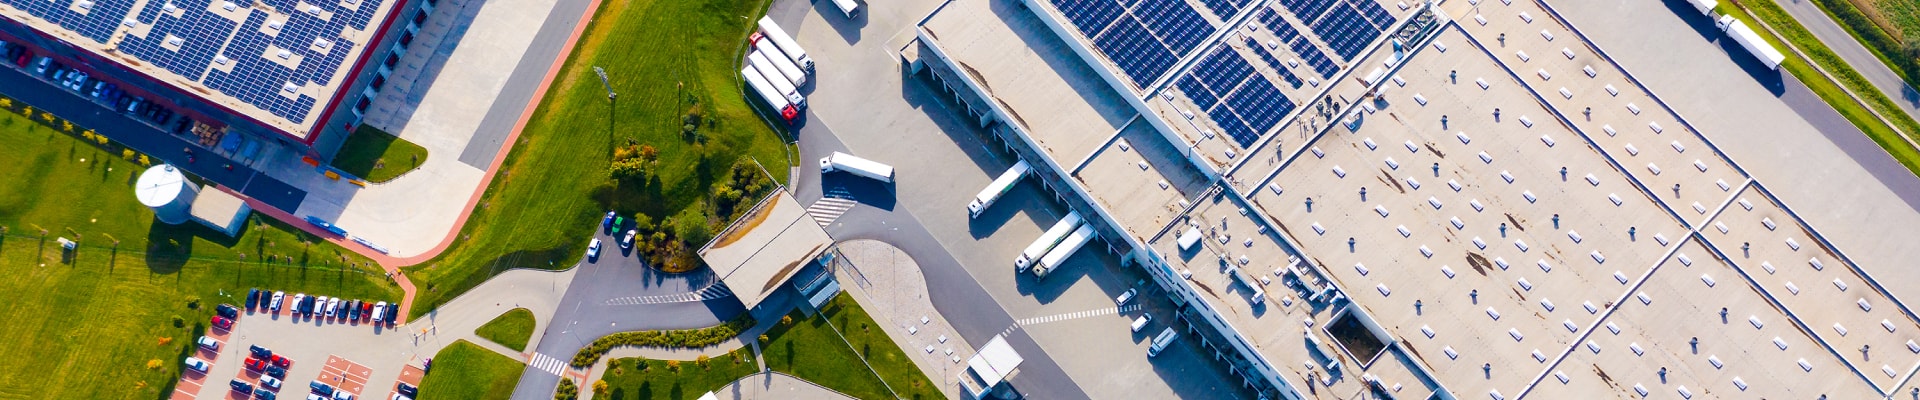 An aerial view of a large industrial building with solar panels, harnessing renewable energy for sustainable operations.